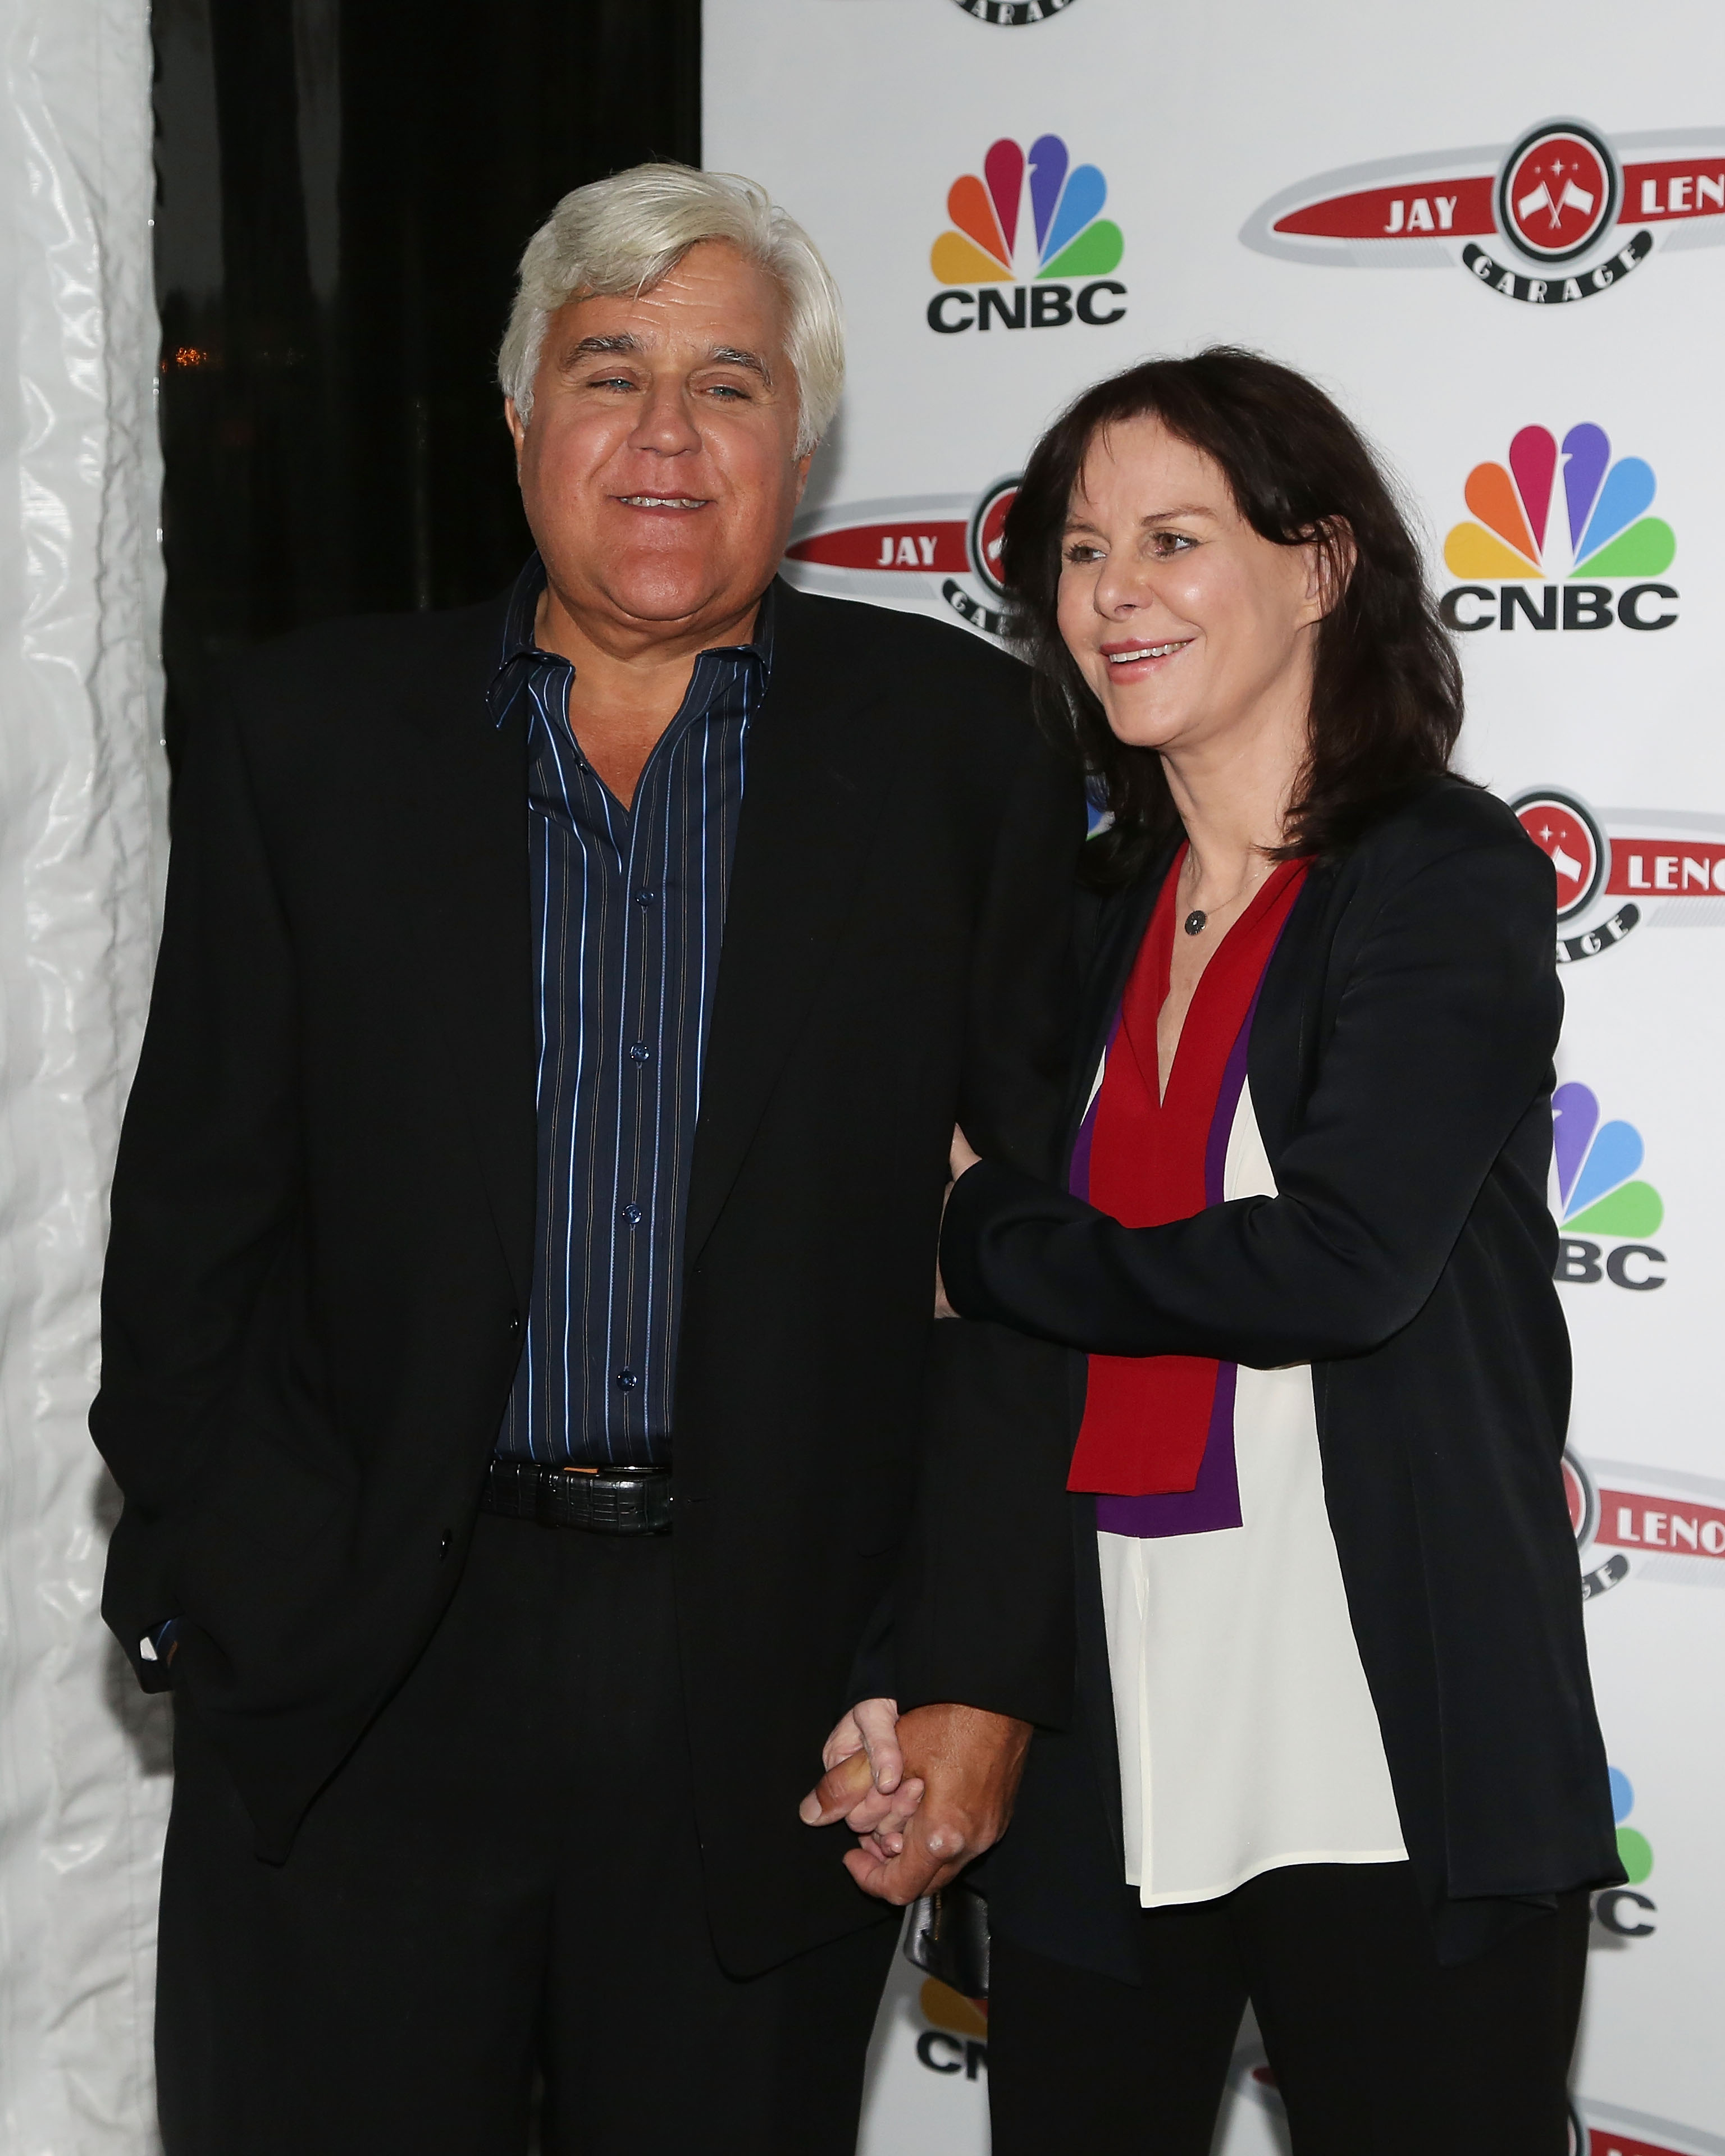 Jay and Mavis Leno at the premiere of "Jay Leno's Garage" in New York City on October 7, 2015 | Source: Getty Images